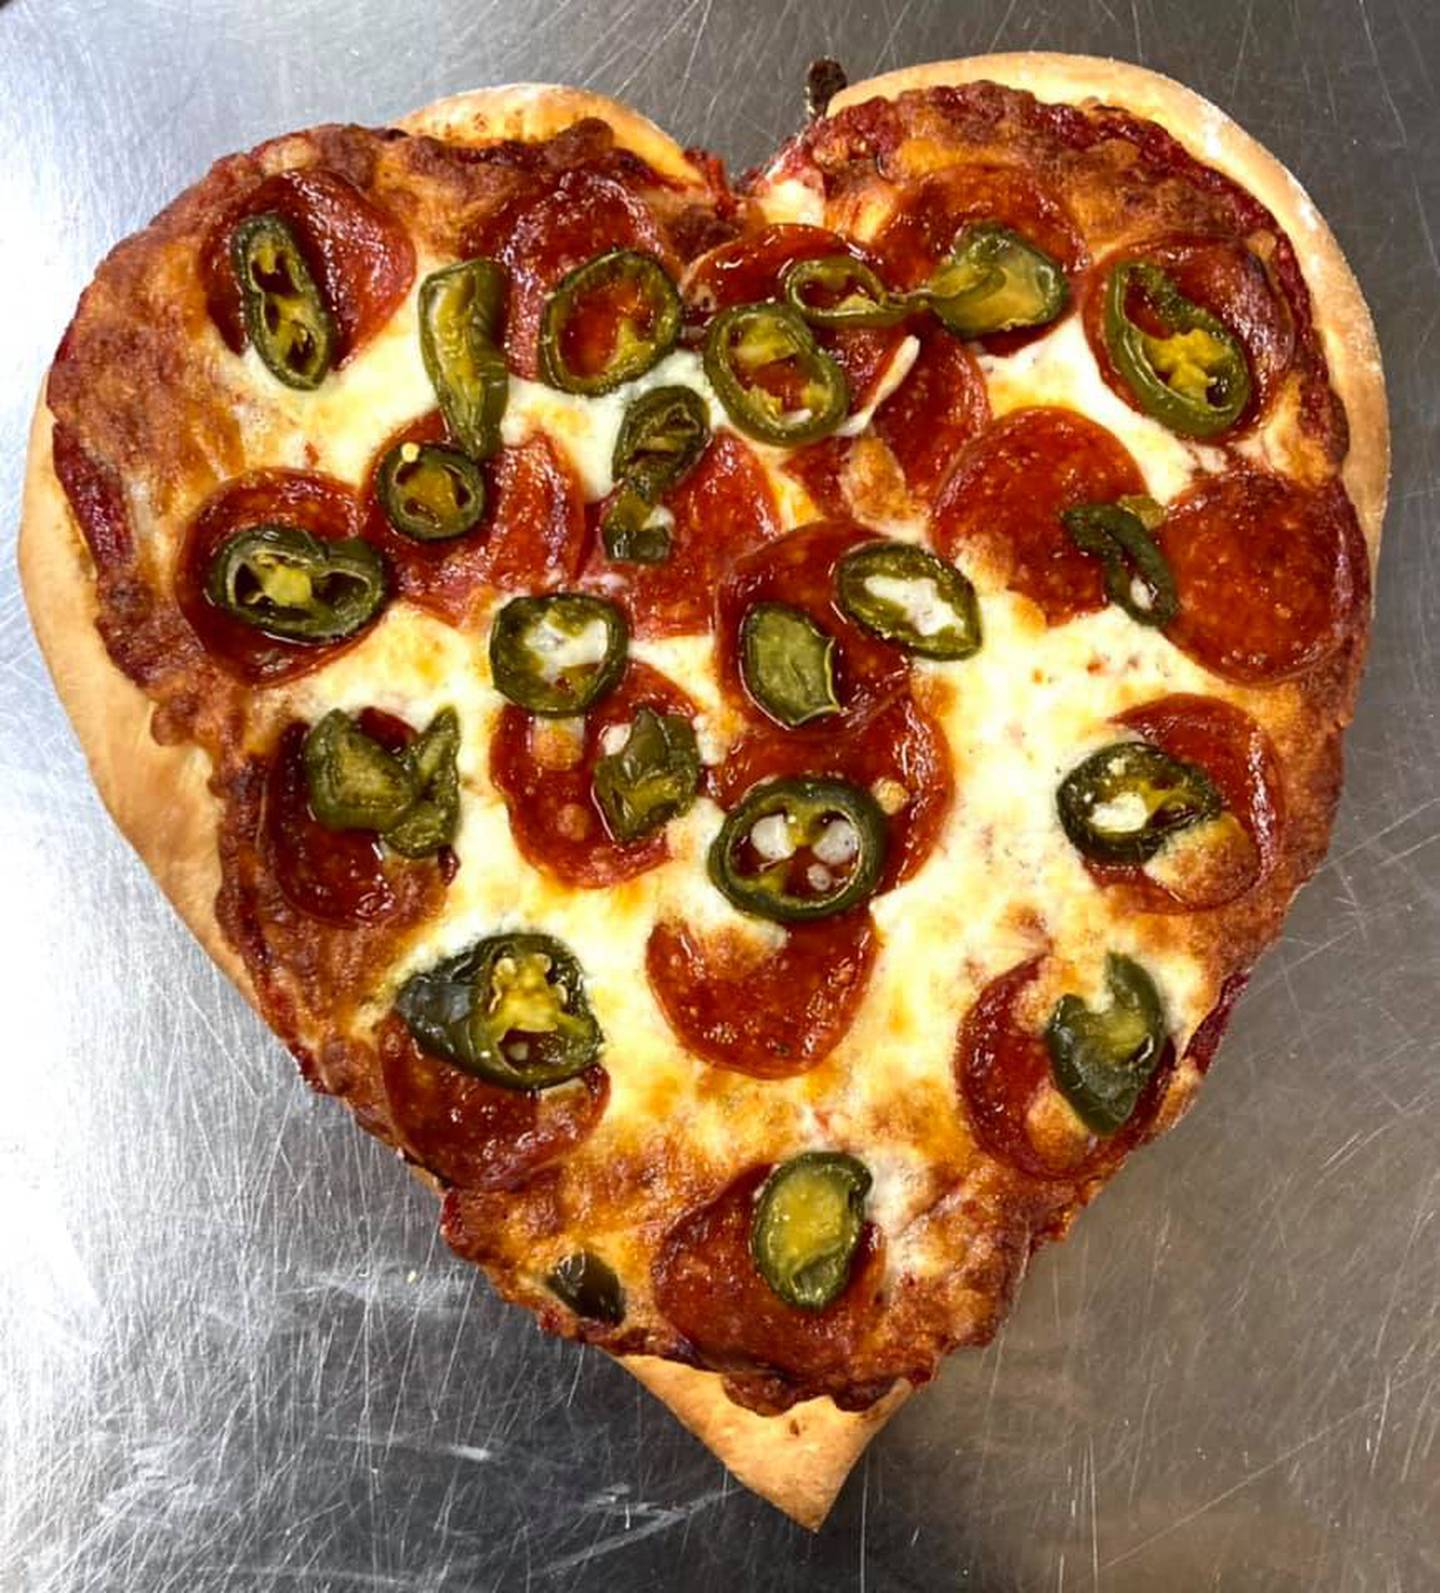 Benny's Pizza in Brewyn was voted in the top nine pizza places in the Cook County area by readers in 2021. (Photo from Benny's Pizza Facebook page)